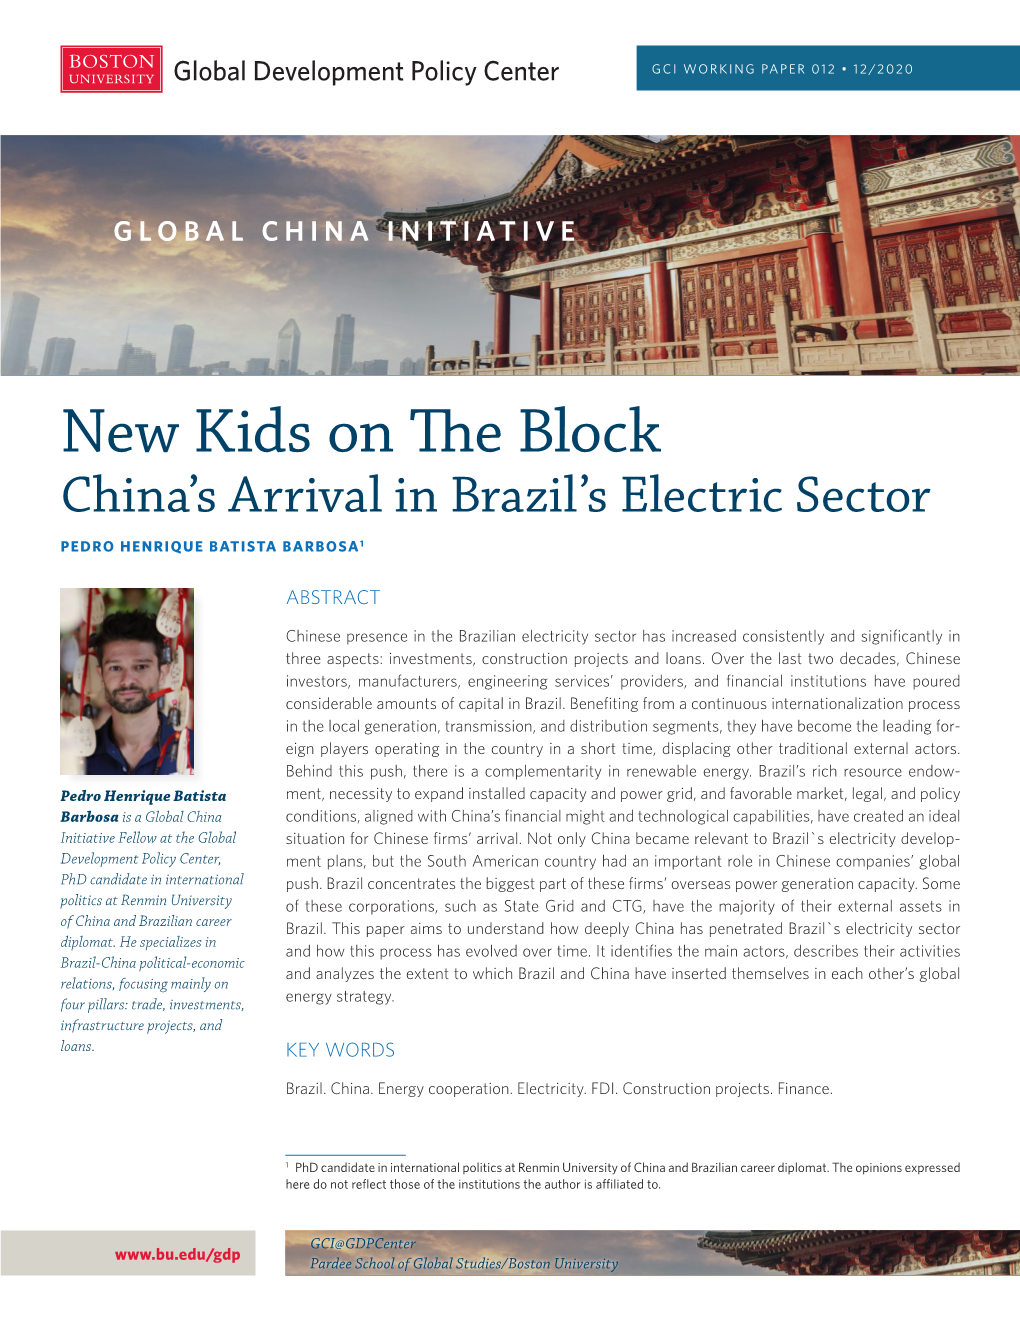 New Kids on the Block China’S Arrival in Brazil’S Electric Sector PEDRO HENRIQUE BATISTA BARBOSA1